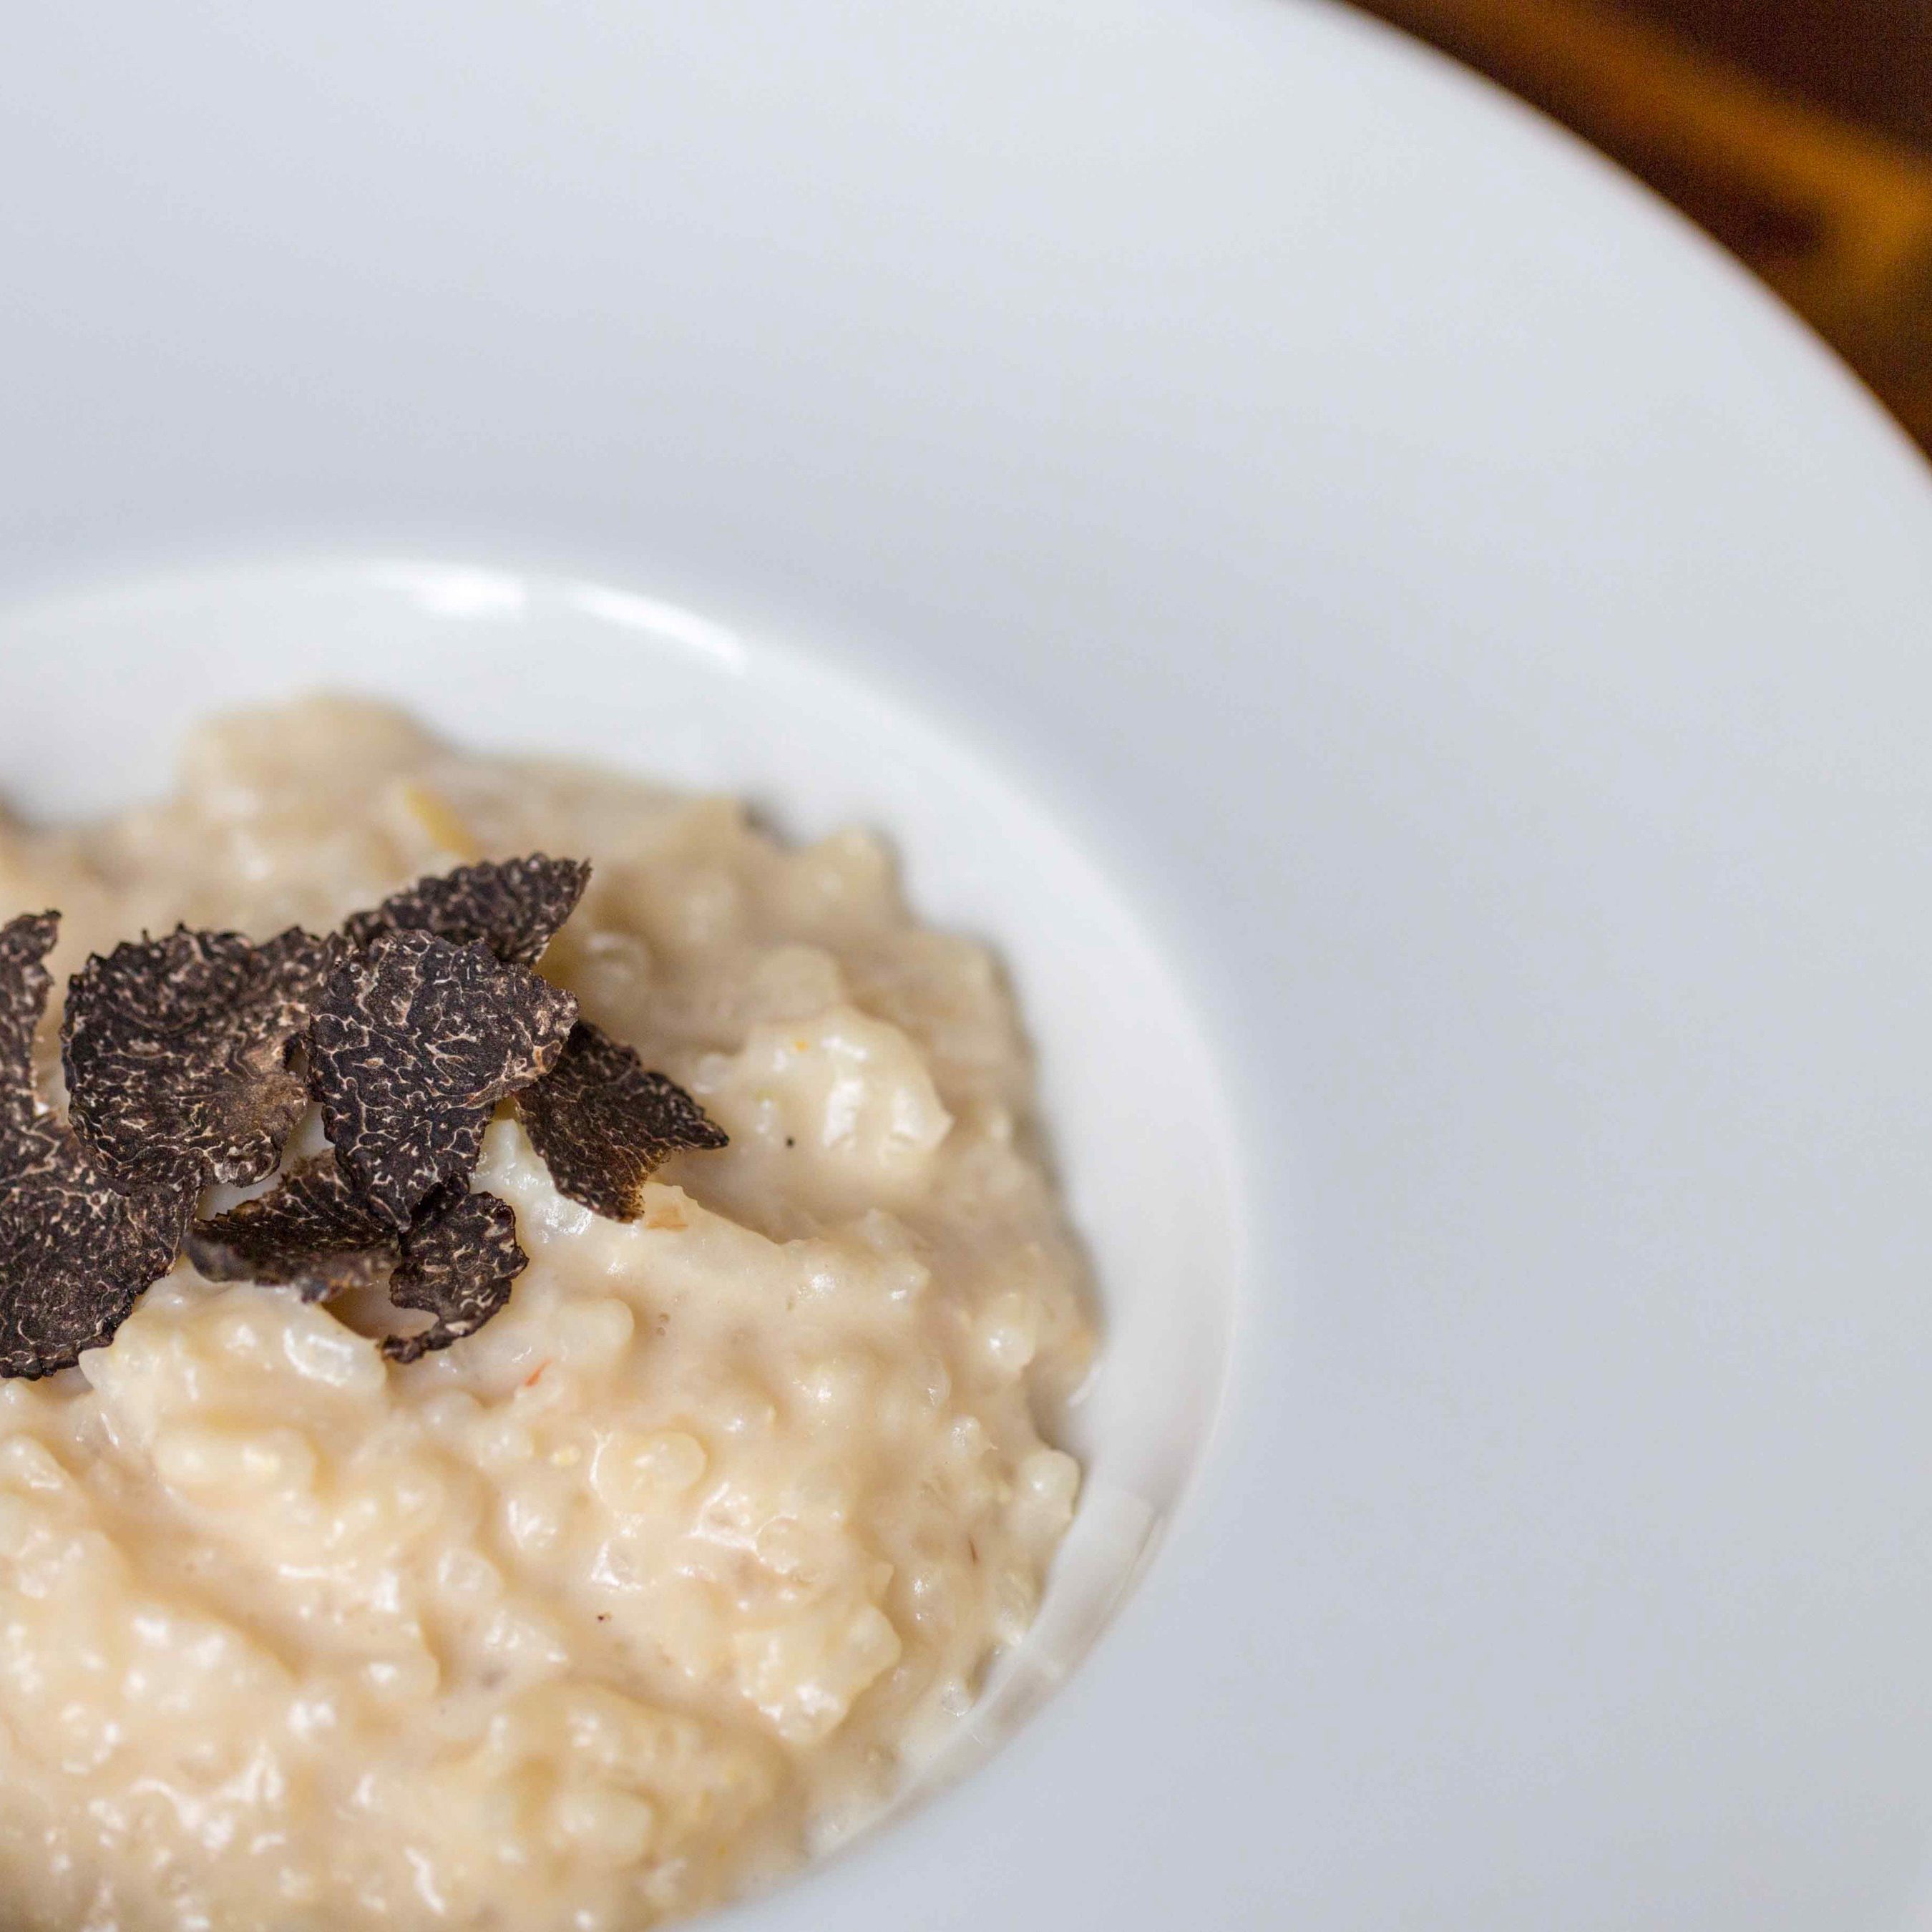 Champagne Risotto with Truffles Recipe Prepared by Sarah Sharratt on UpRooted